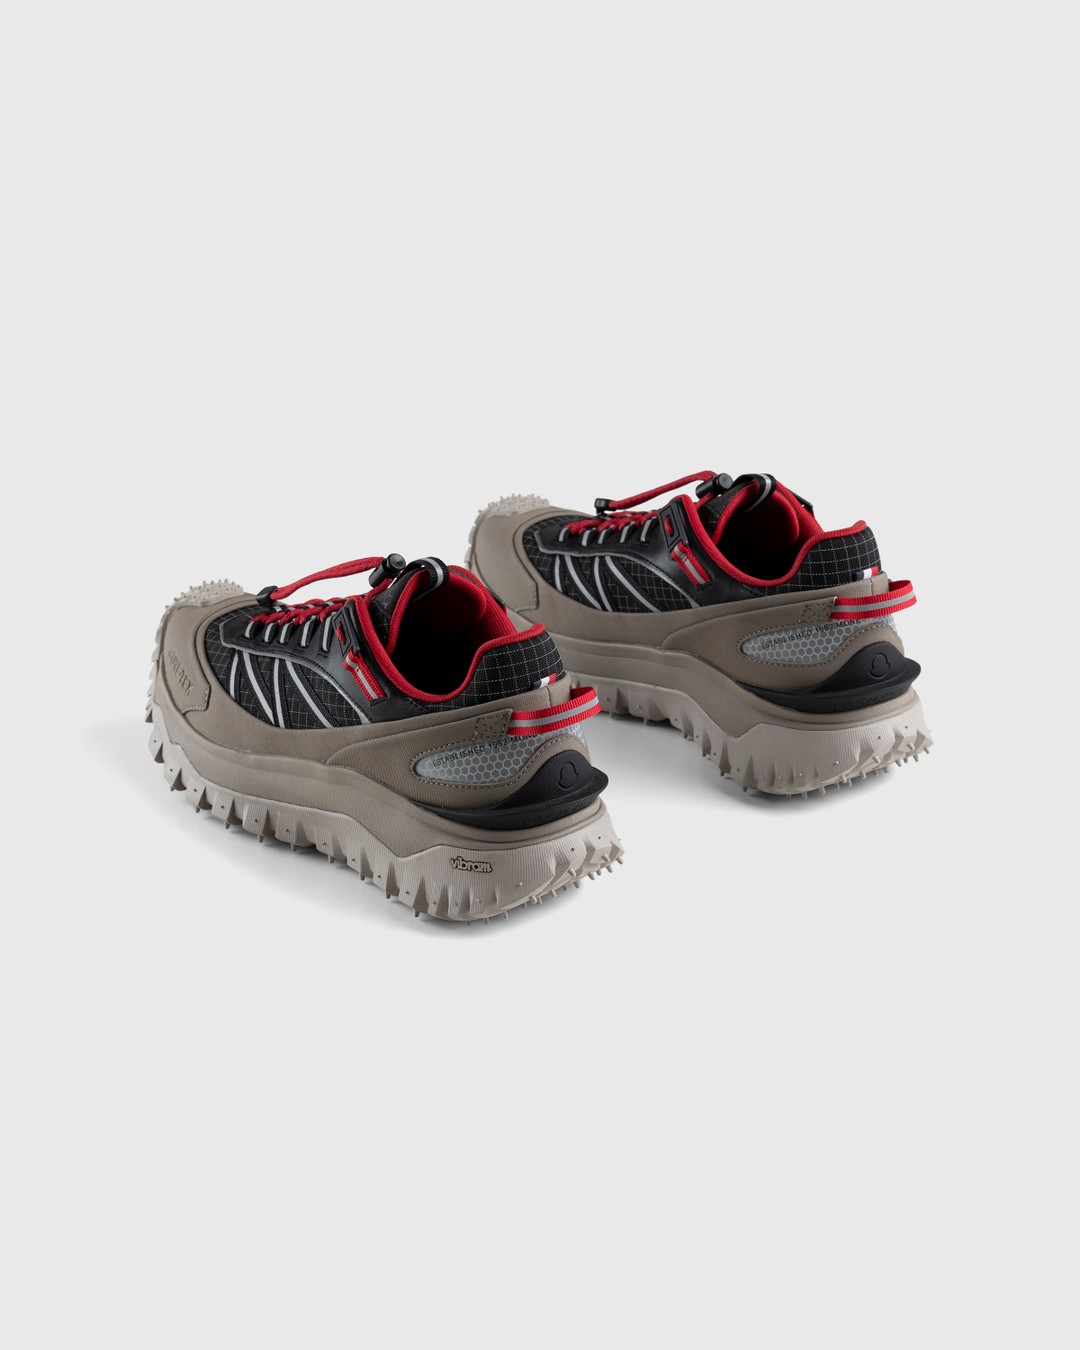 Moncler – Trailgrip GTX Sneakers Taupe - Low Top Sneakers - Beige - Image 4